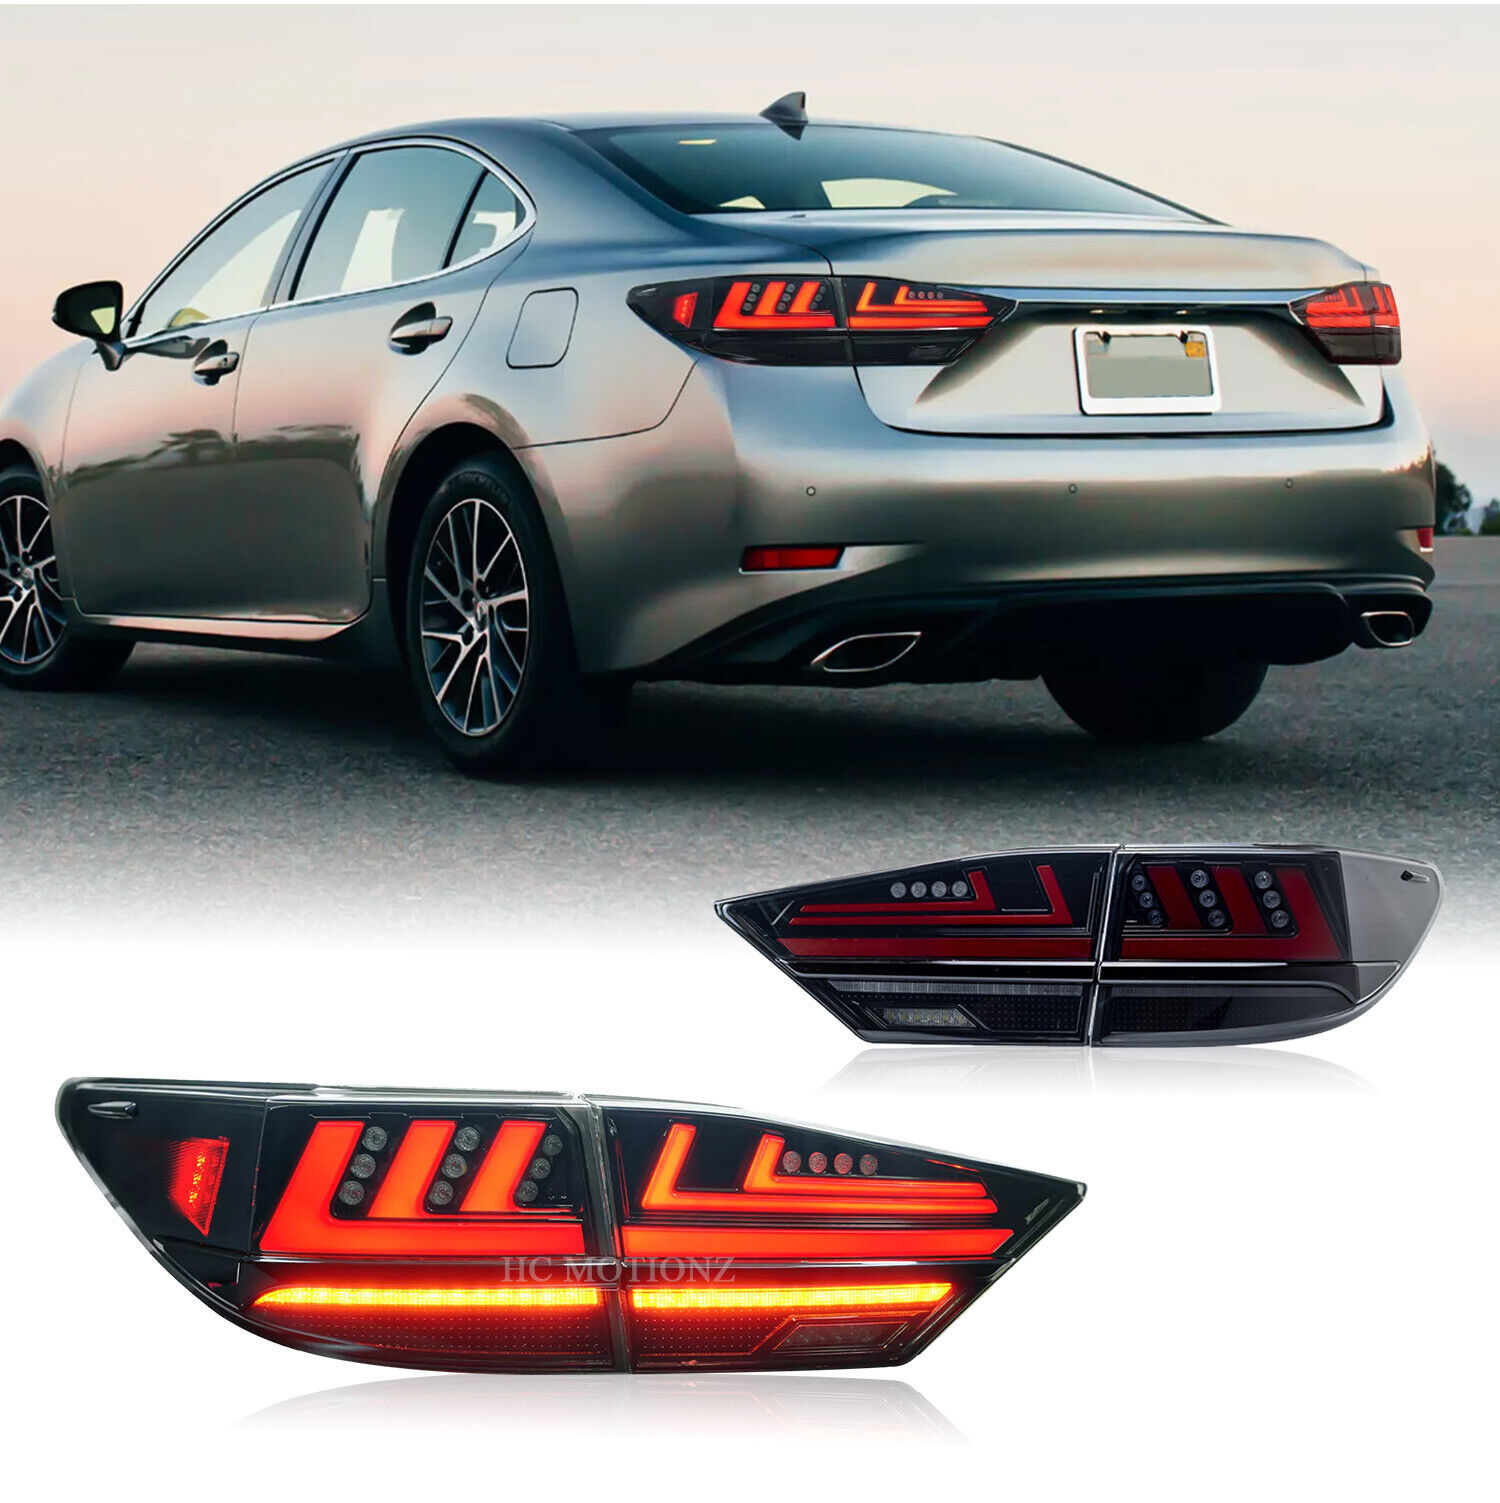 HCmotion For Lexus ES350 ES 300h 2013-2018 LED Tail Lights Smoke Assembly